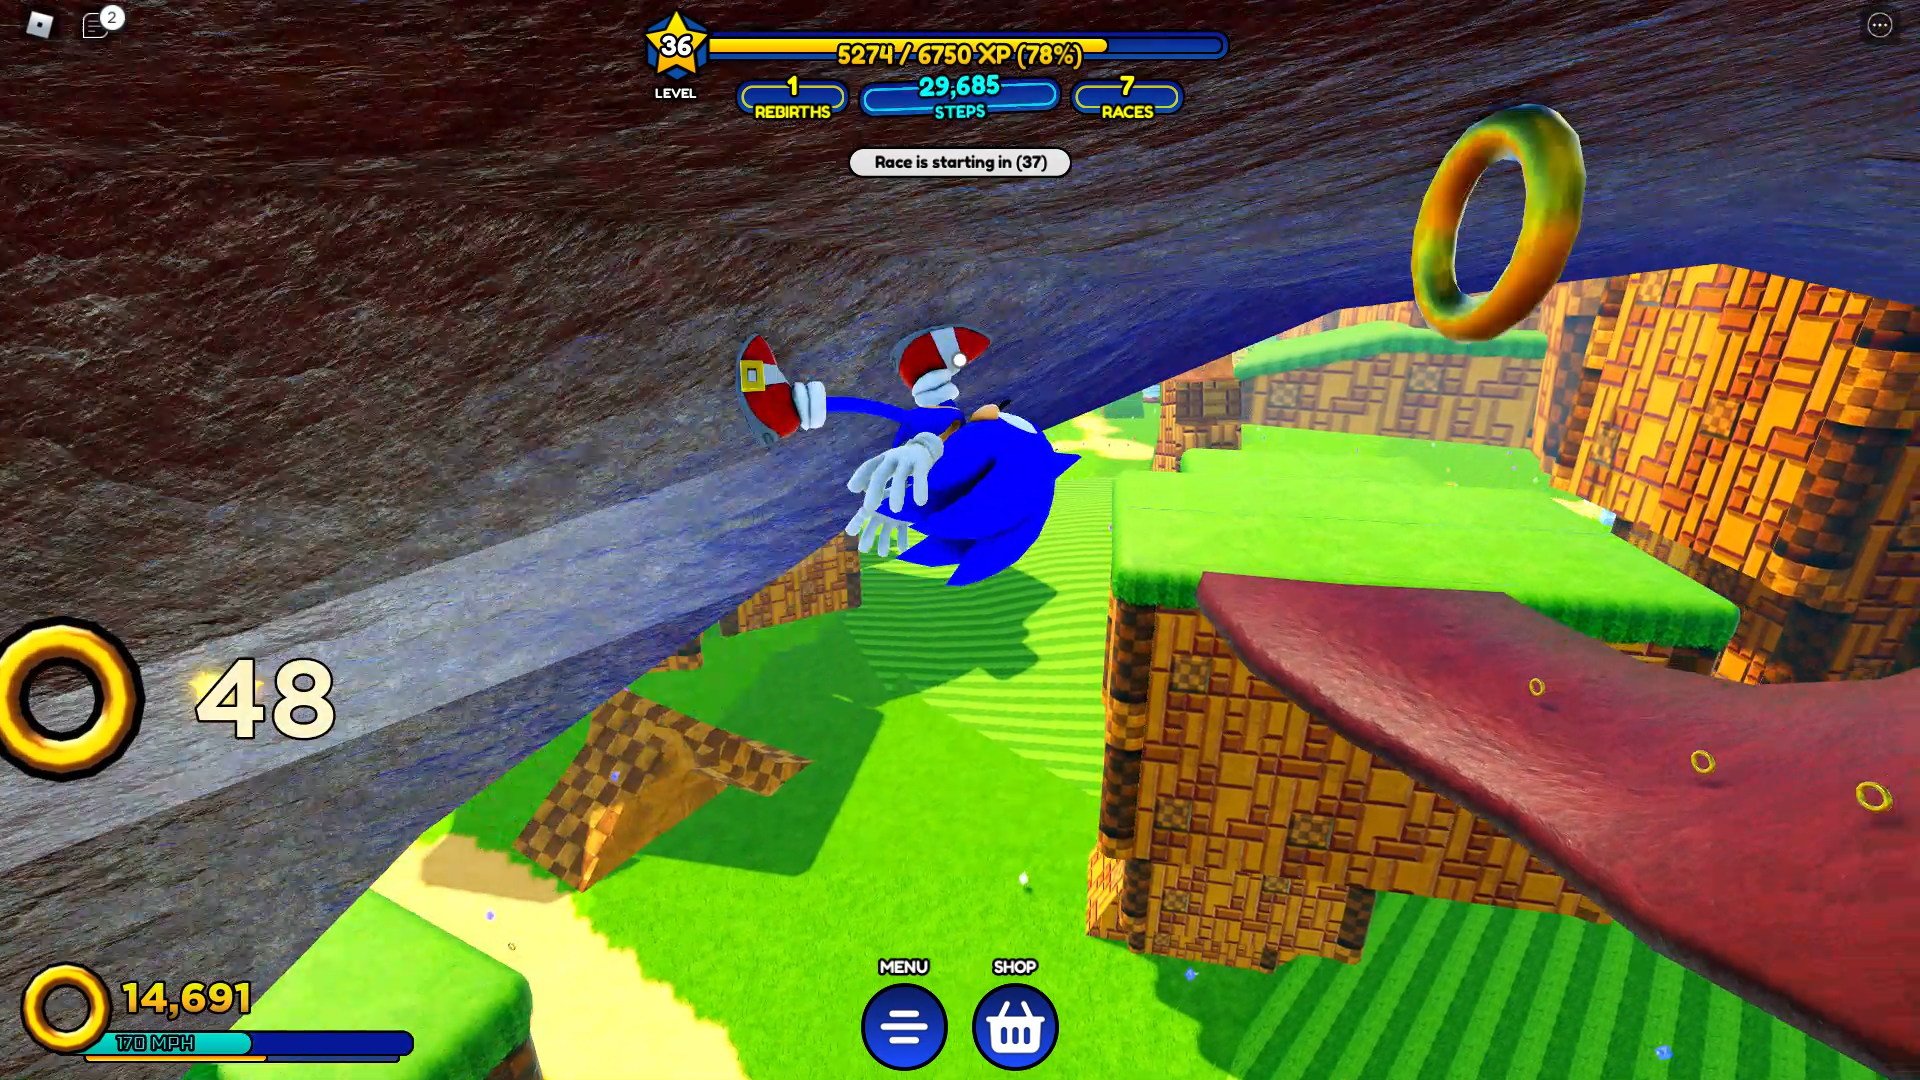 Sonic Speed ​​Simulator review - Sonic collecting rings while running upside down on a rocky surface with green platforms in the background.